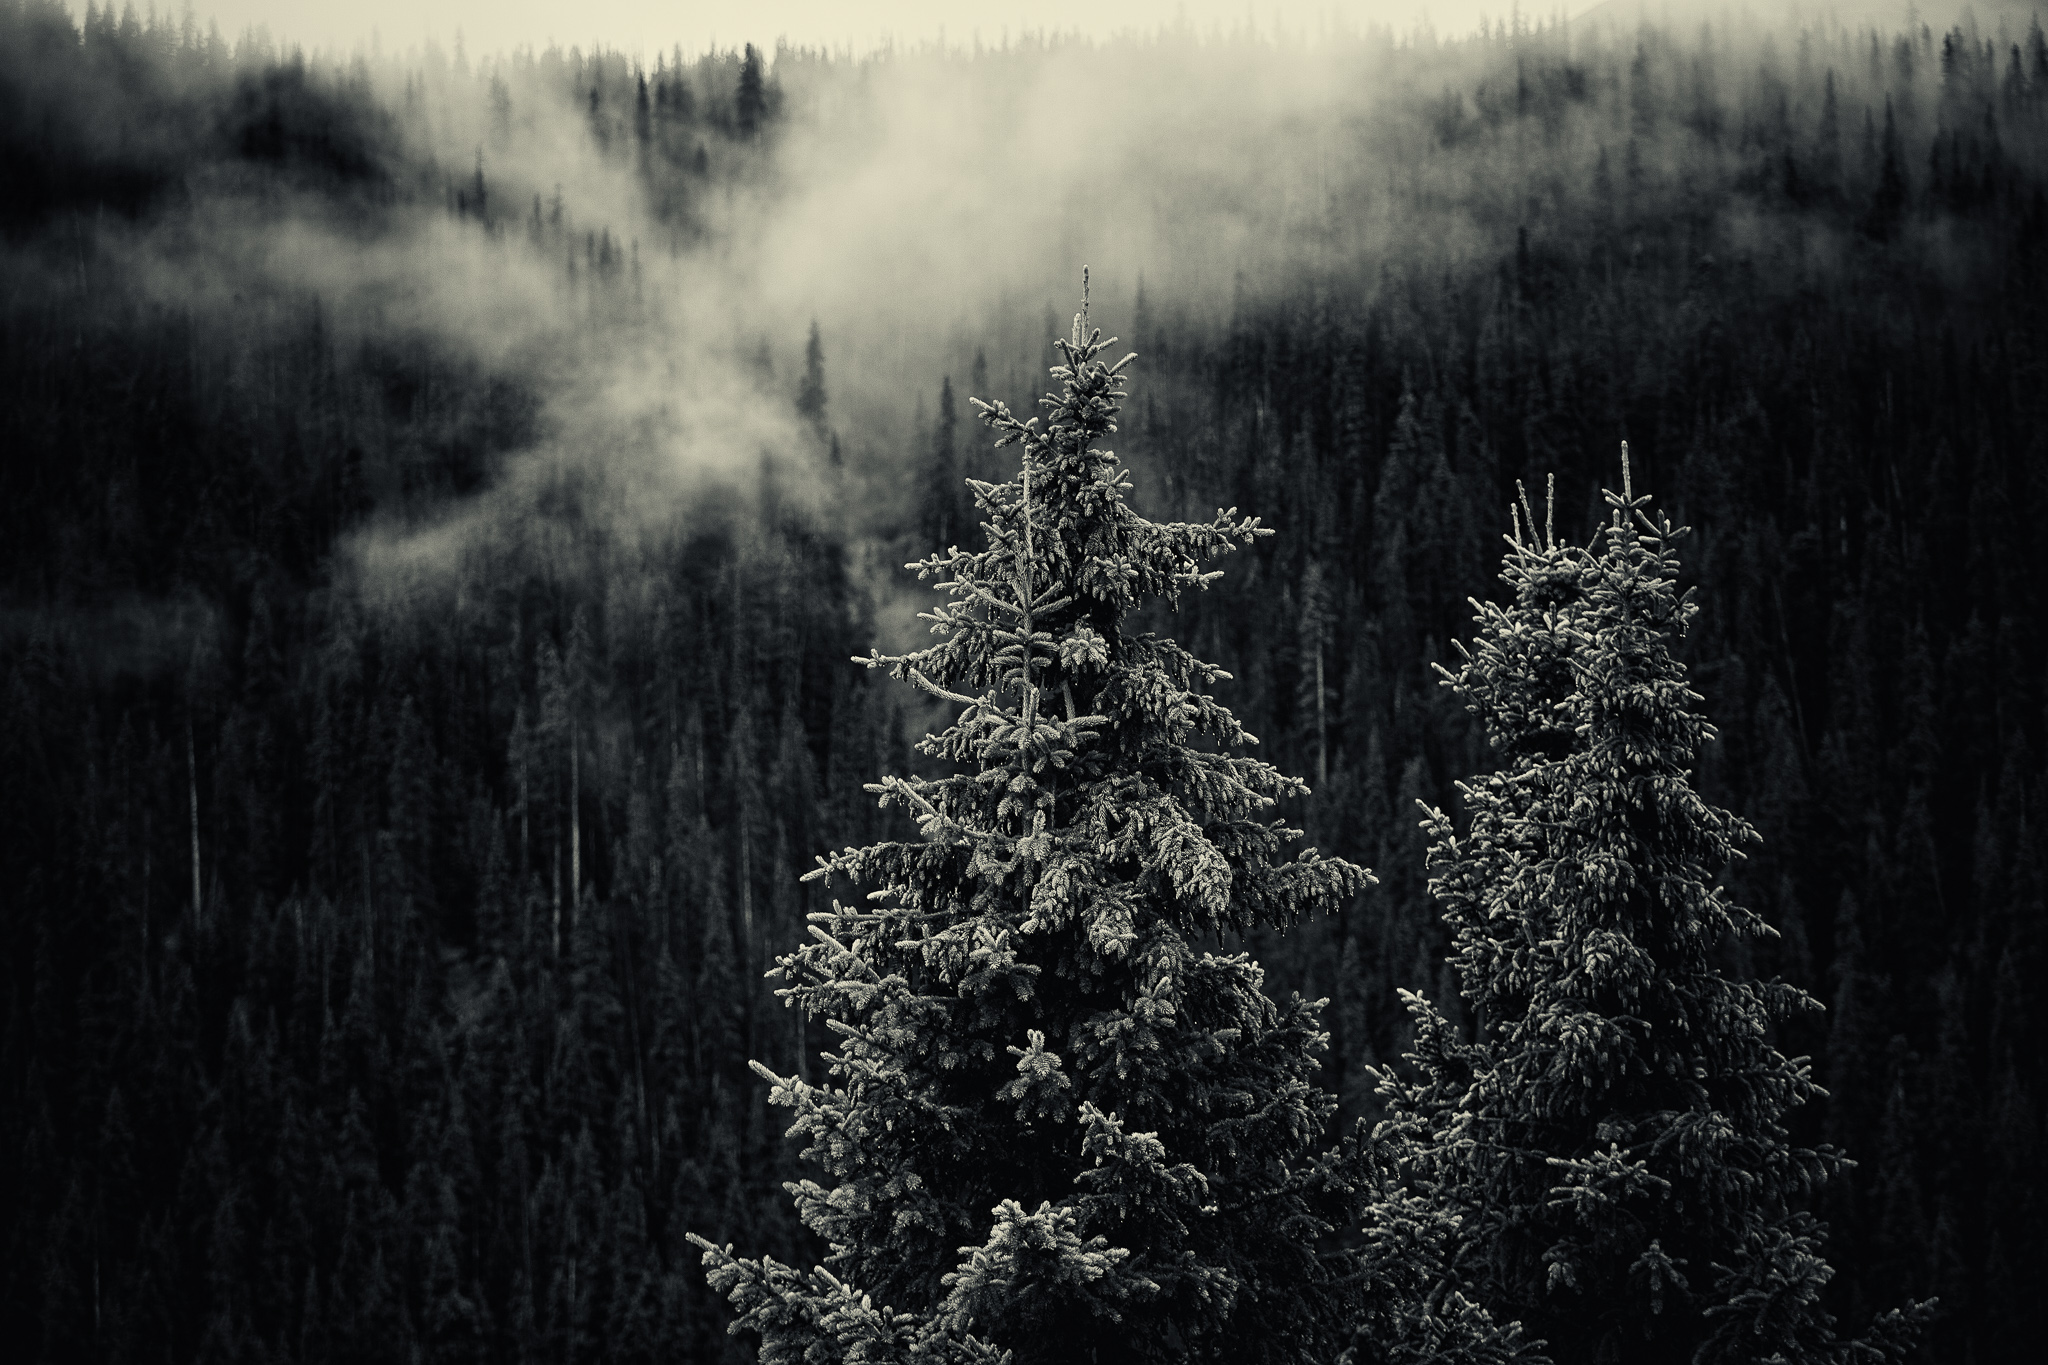 Trees in the Fog - B&W, San Juan National Forest, CO